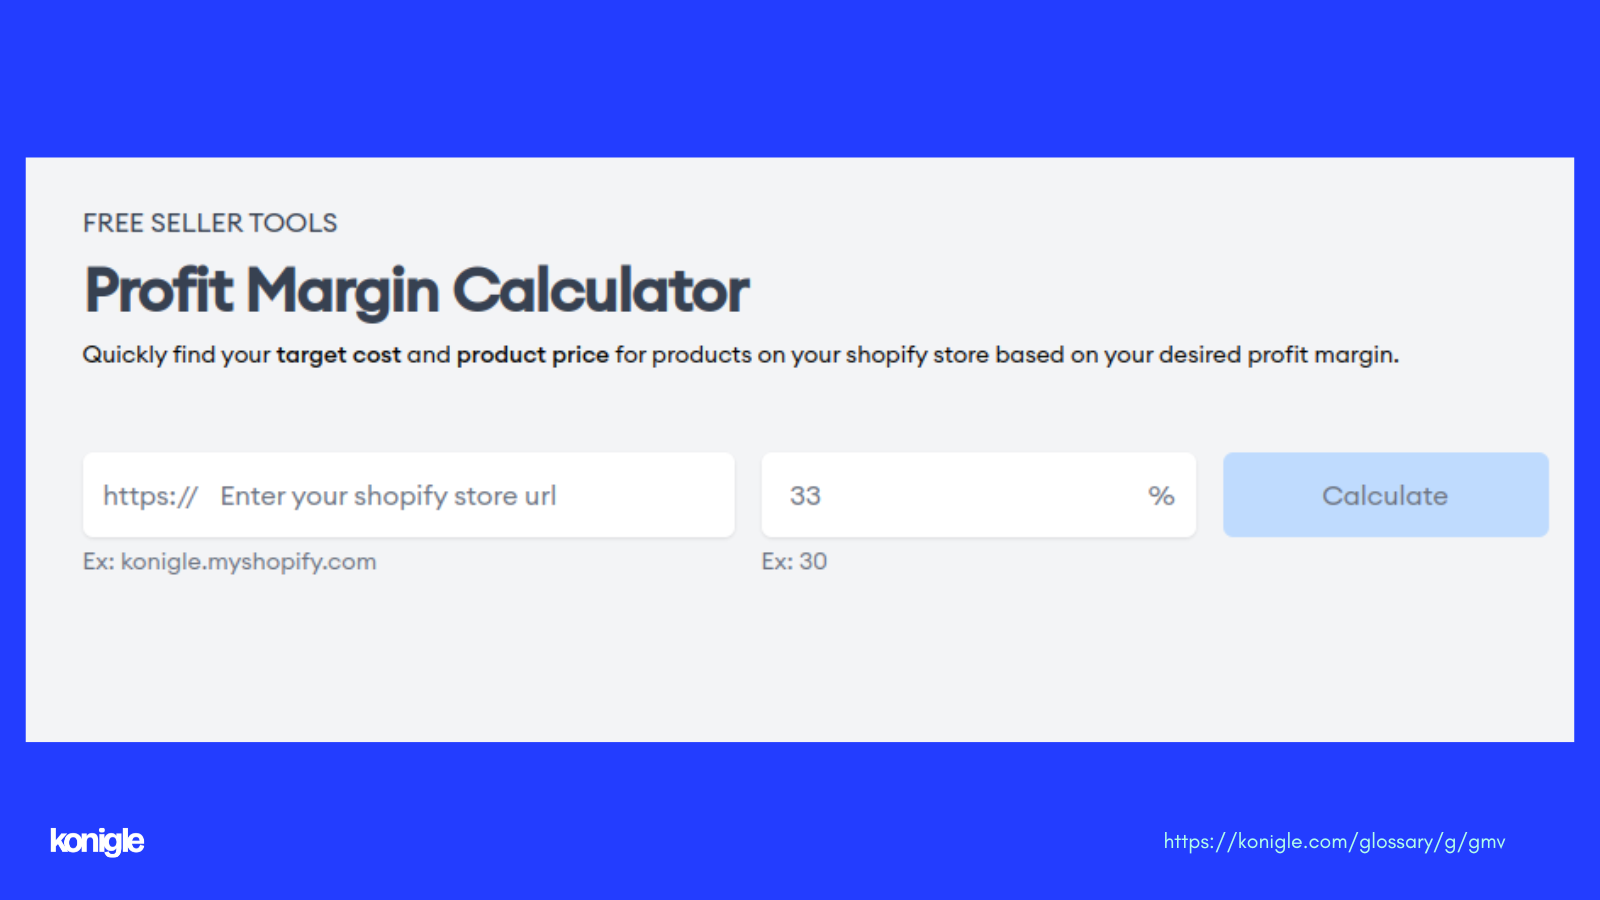 Use Profit Margin Calculator to find product price on your Shopify Store